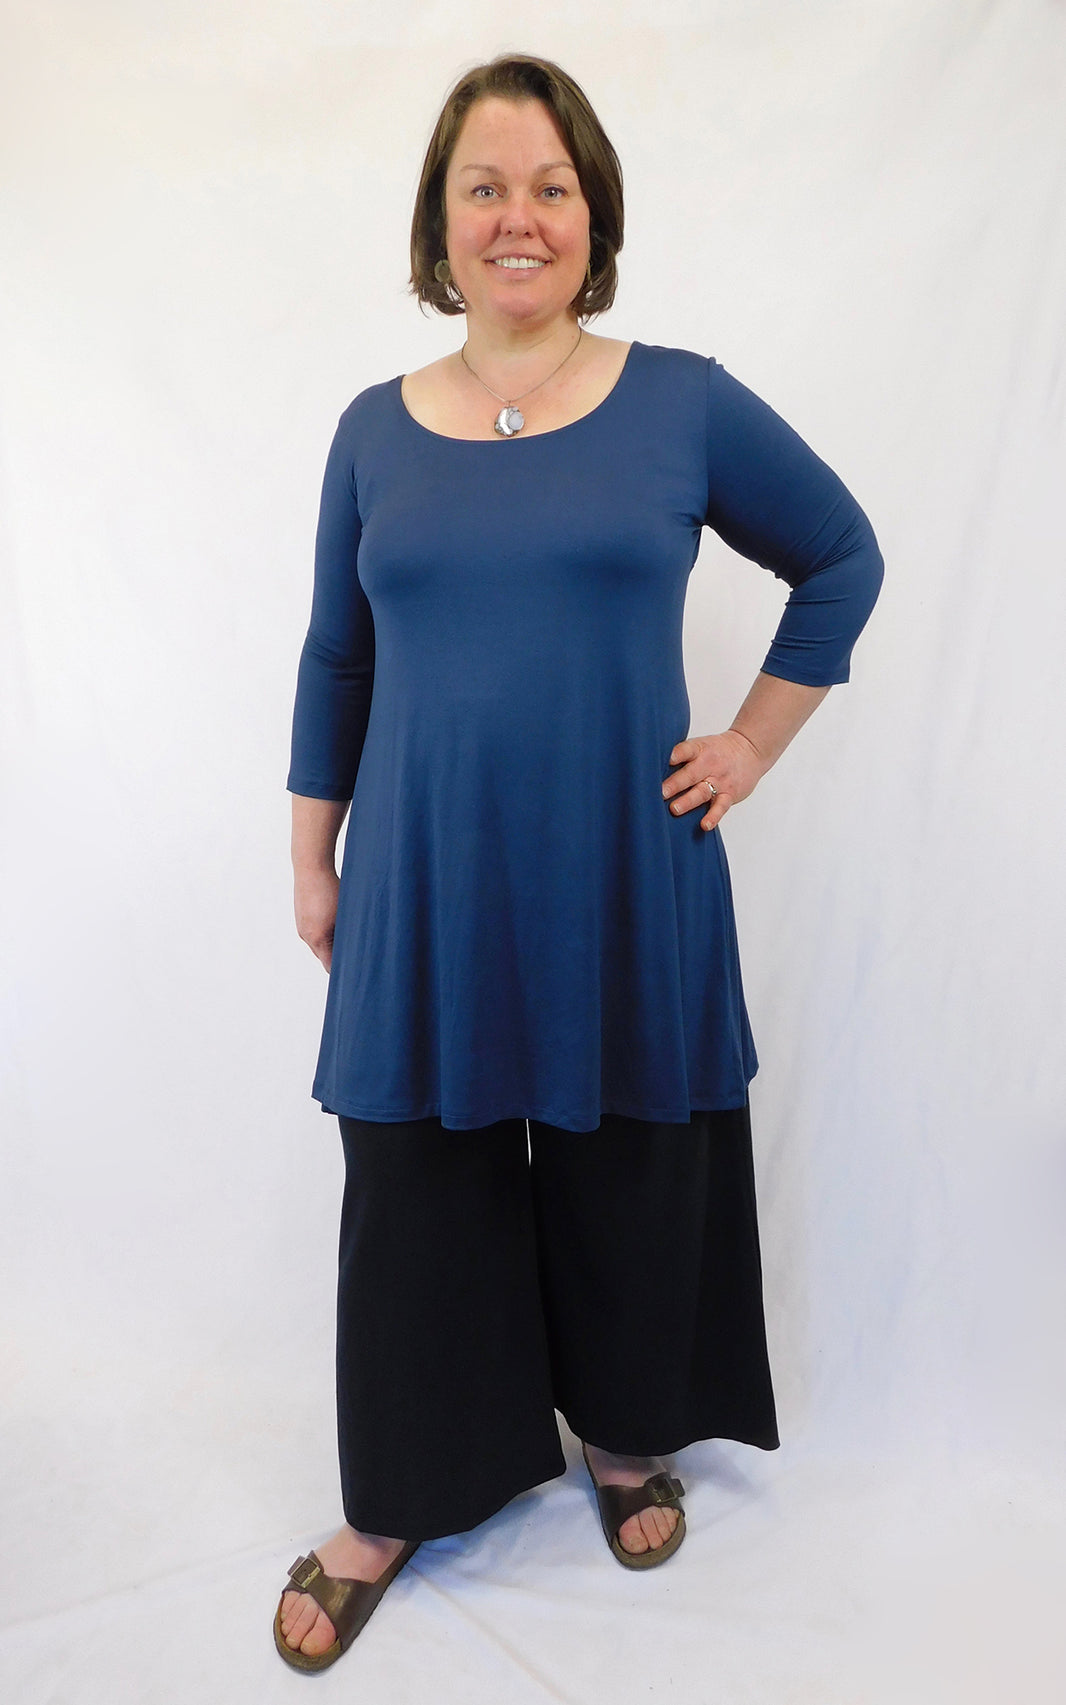 Brenda Laine Designs - Sustainable Fashion, Locally Made